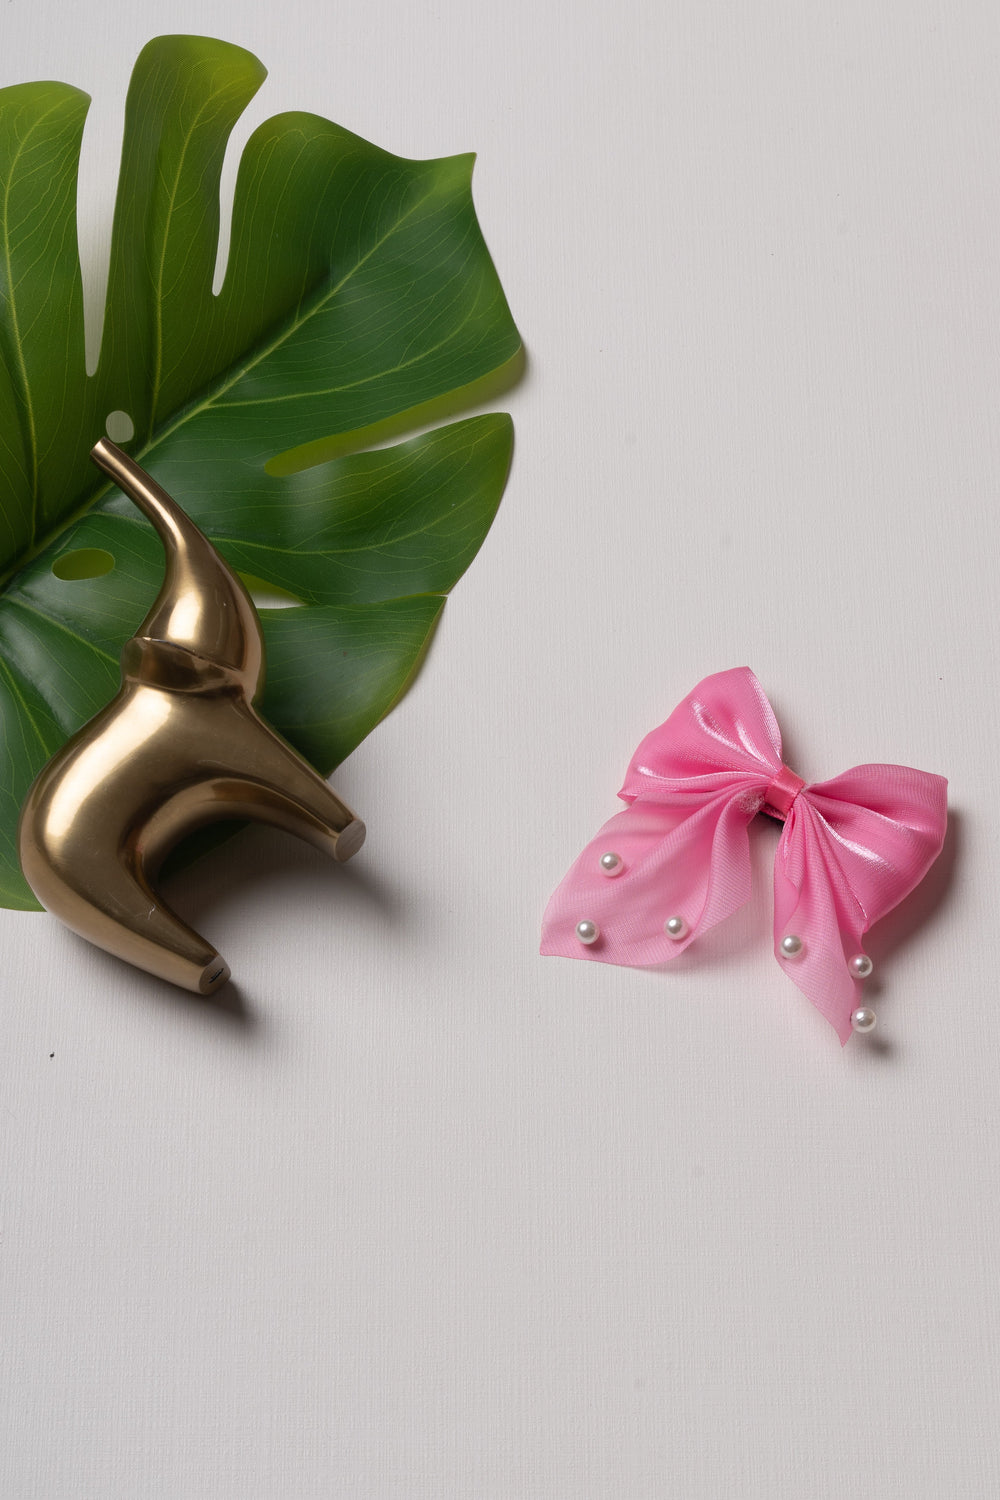 The Nesavu Hair Clip Pearl Accented Pink Satin Bow Hair Clip Nesavu Pink JHCL76G Chic Pink Satin Hair Bow with Pearl Accents | Playful Elegance for Every Occasion | The Nesavu